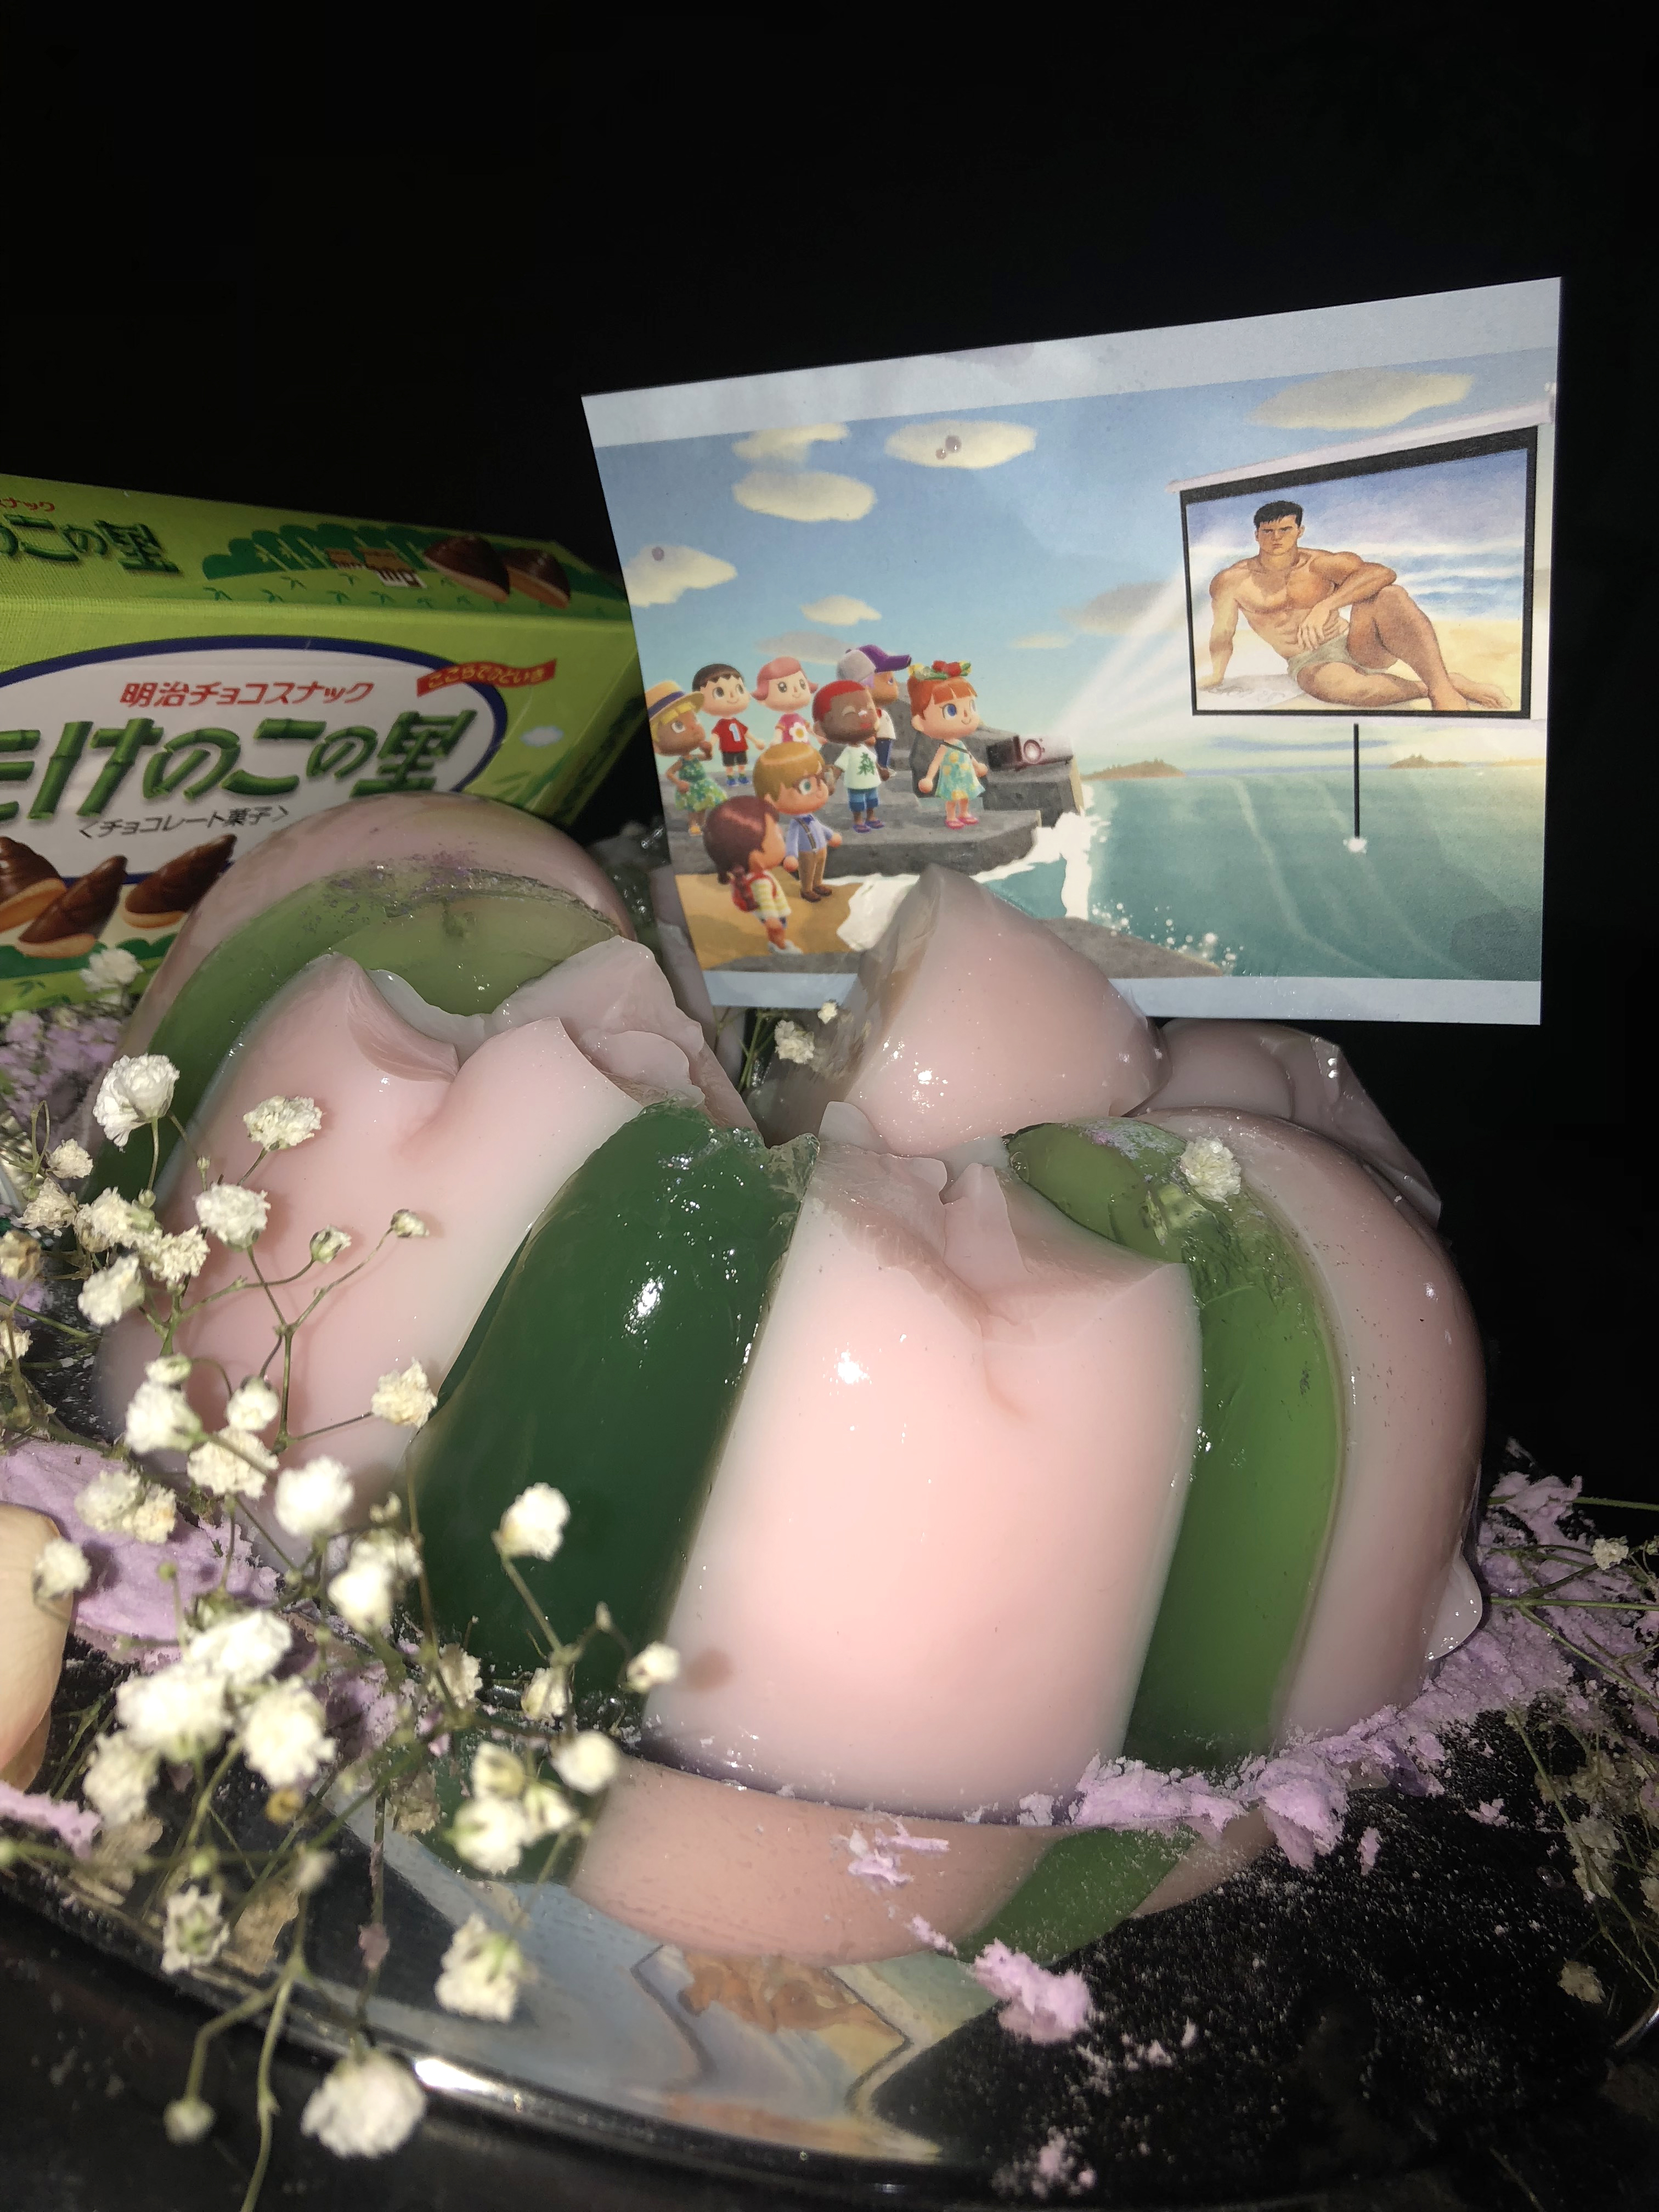 A postcard shoved in a pink and green jello cake which has been partially eaten